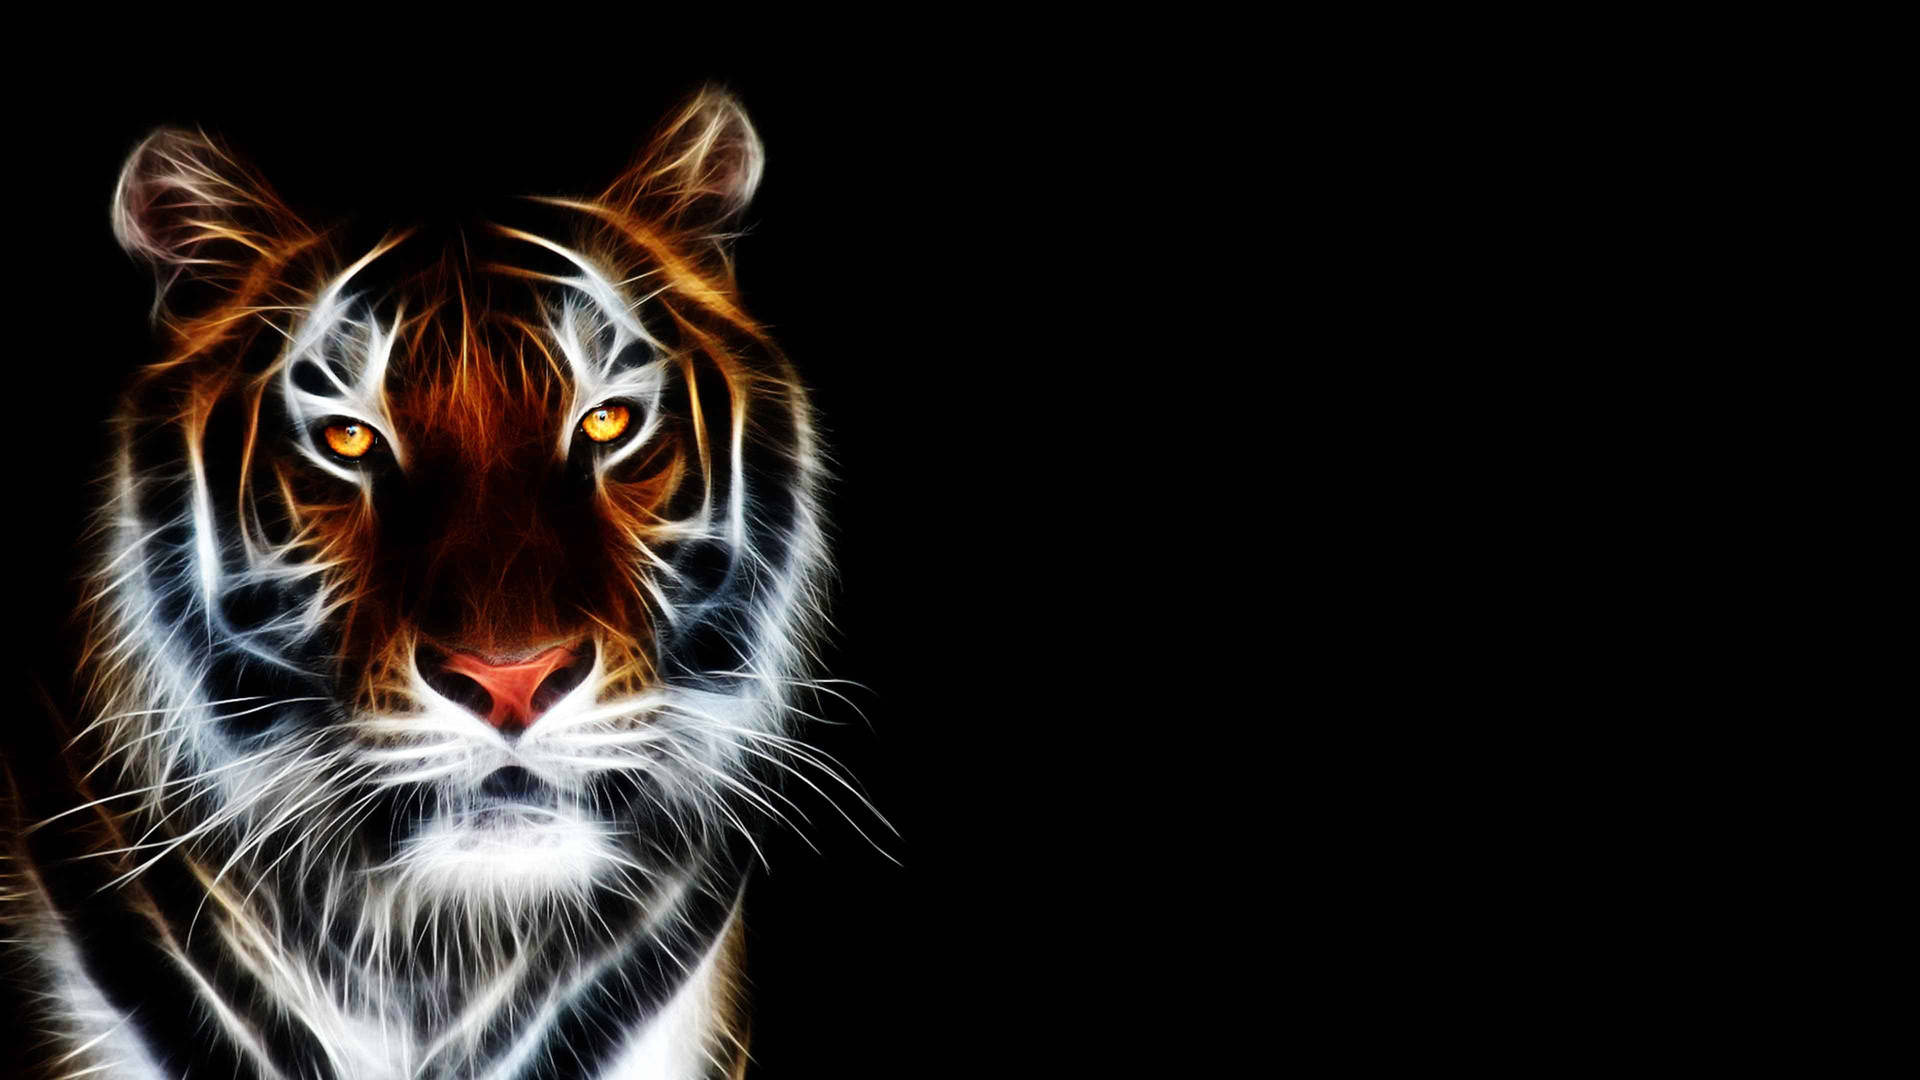 3d Animated Tiger